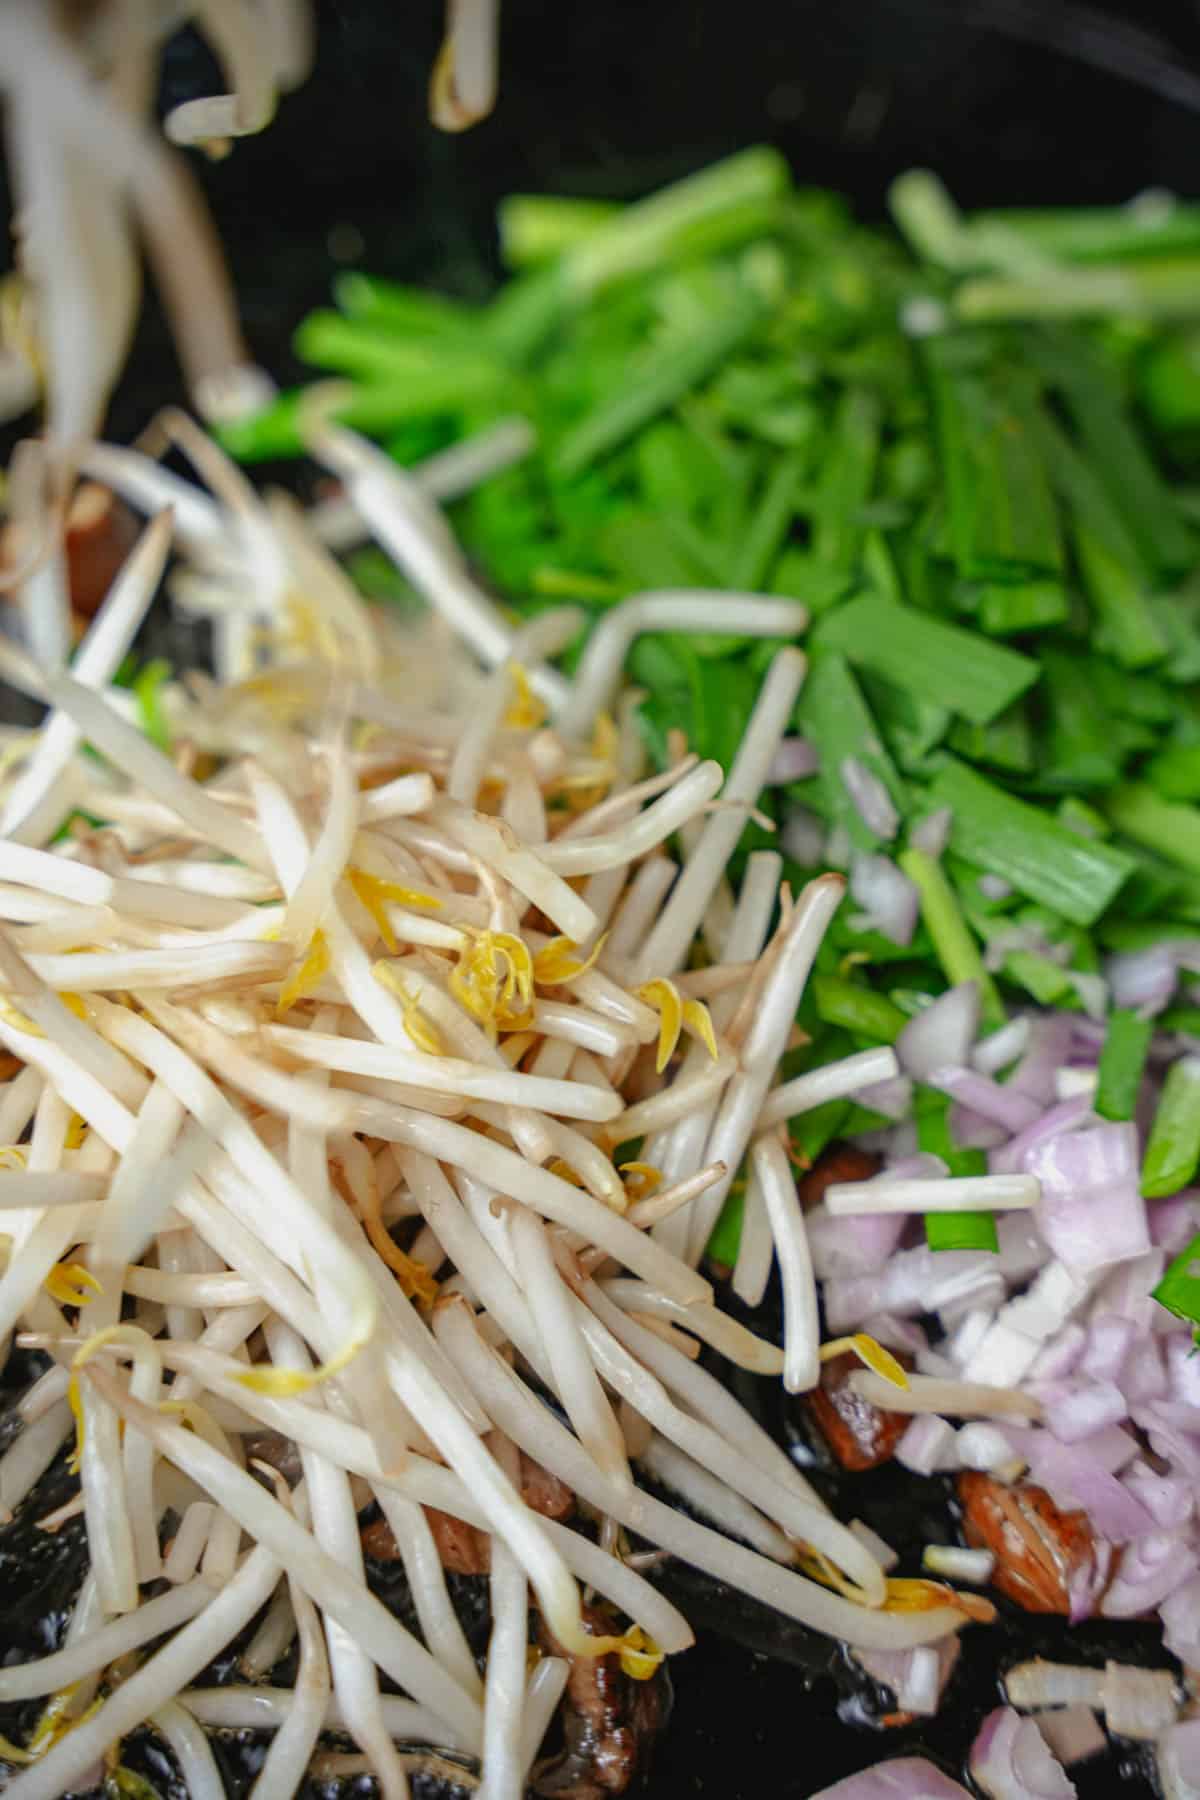 Beansprouts are added to the pan.